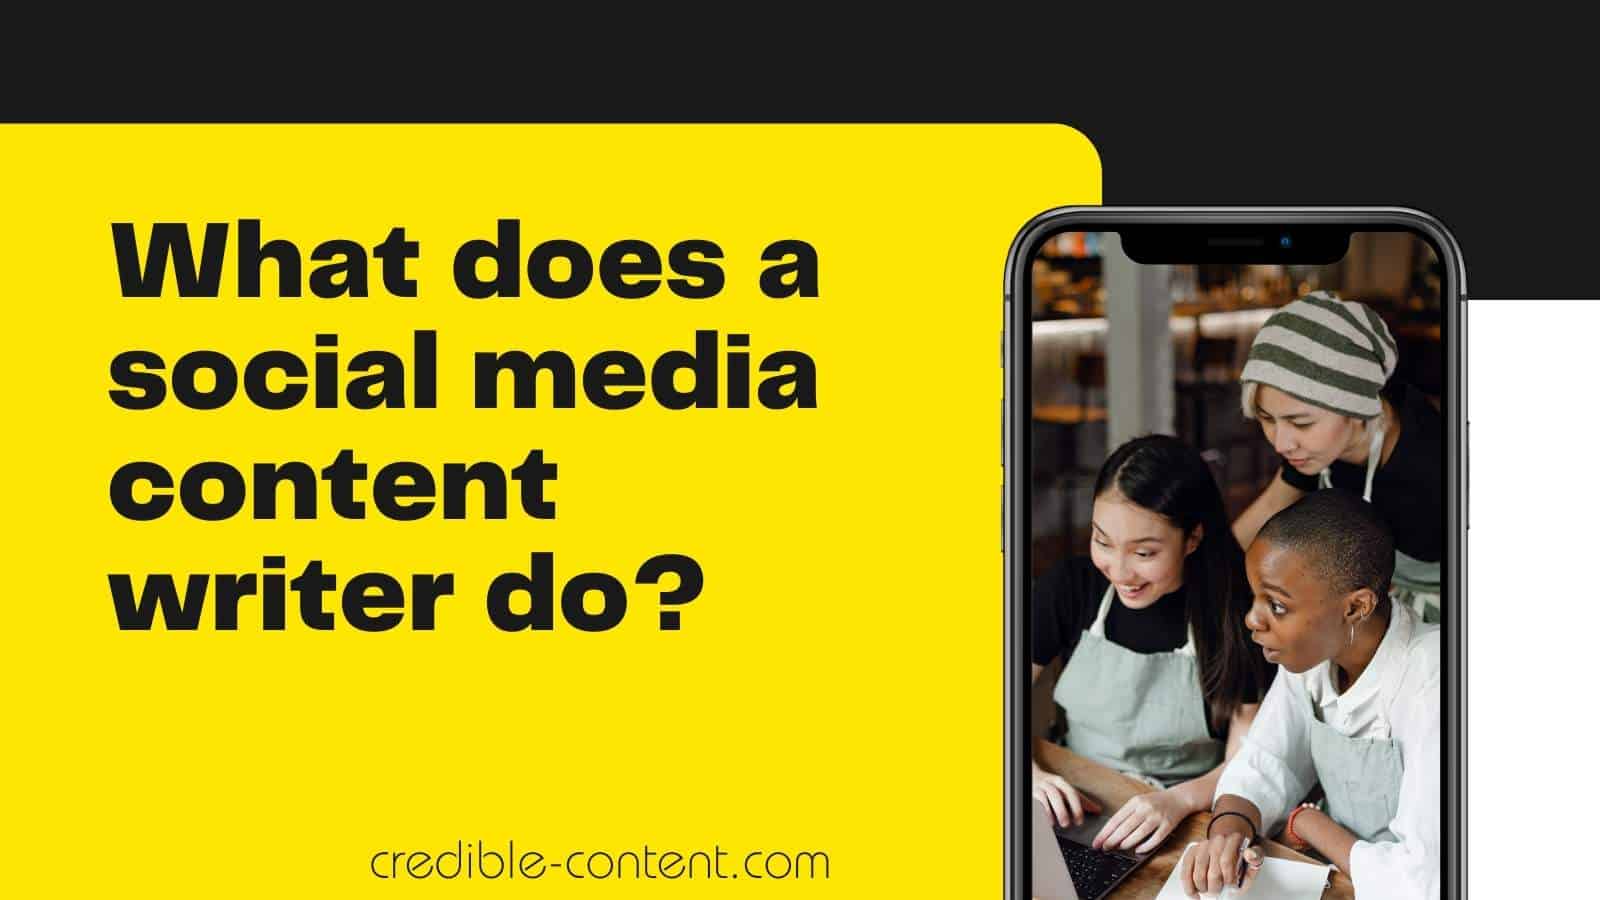 What does a social media content writer do